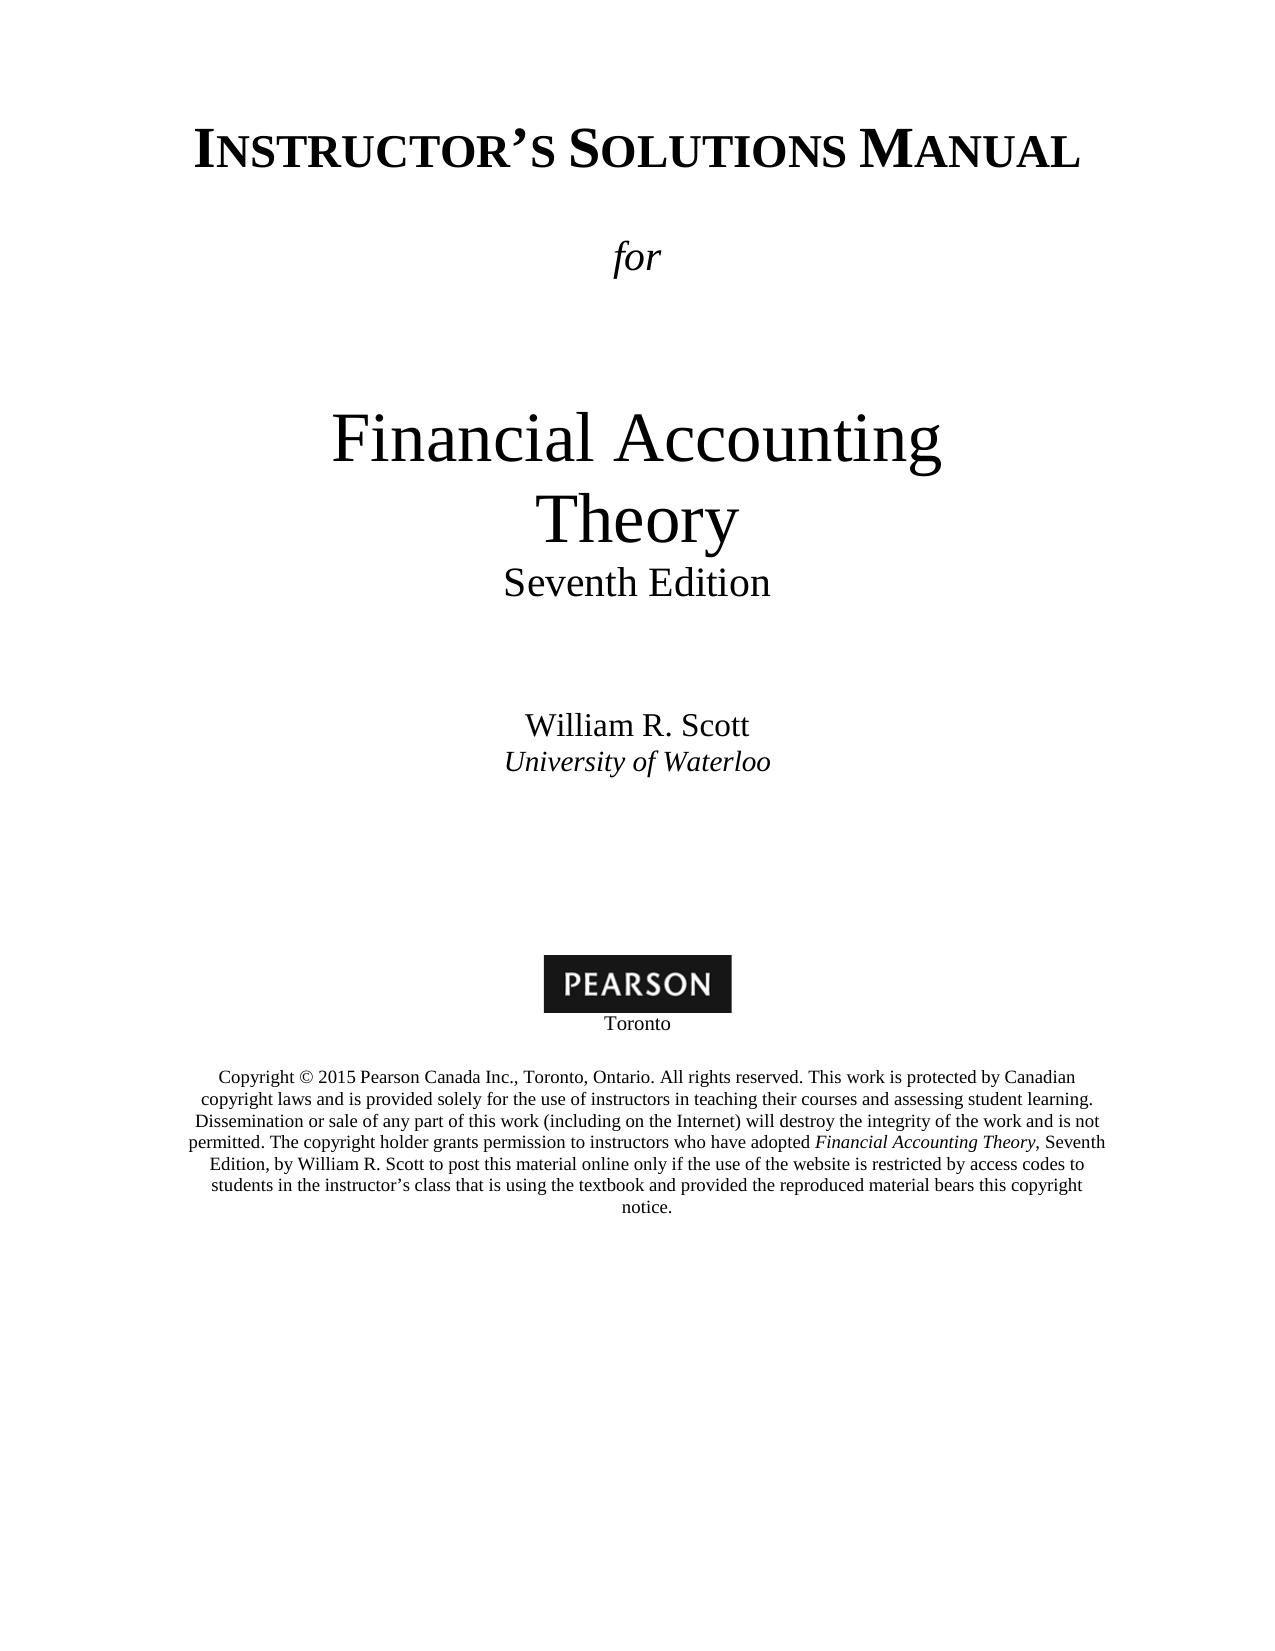 Solution manual for Financial Accounting Theory (7th Edition 2015